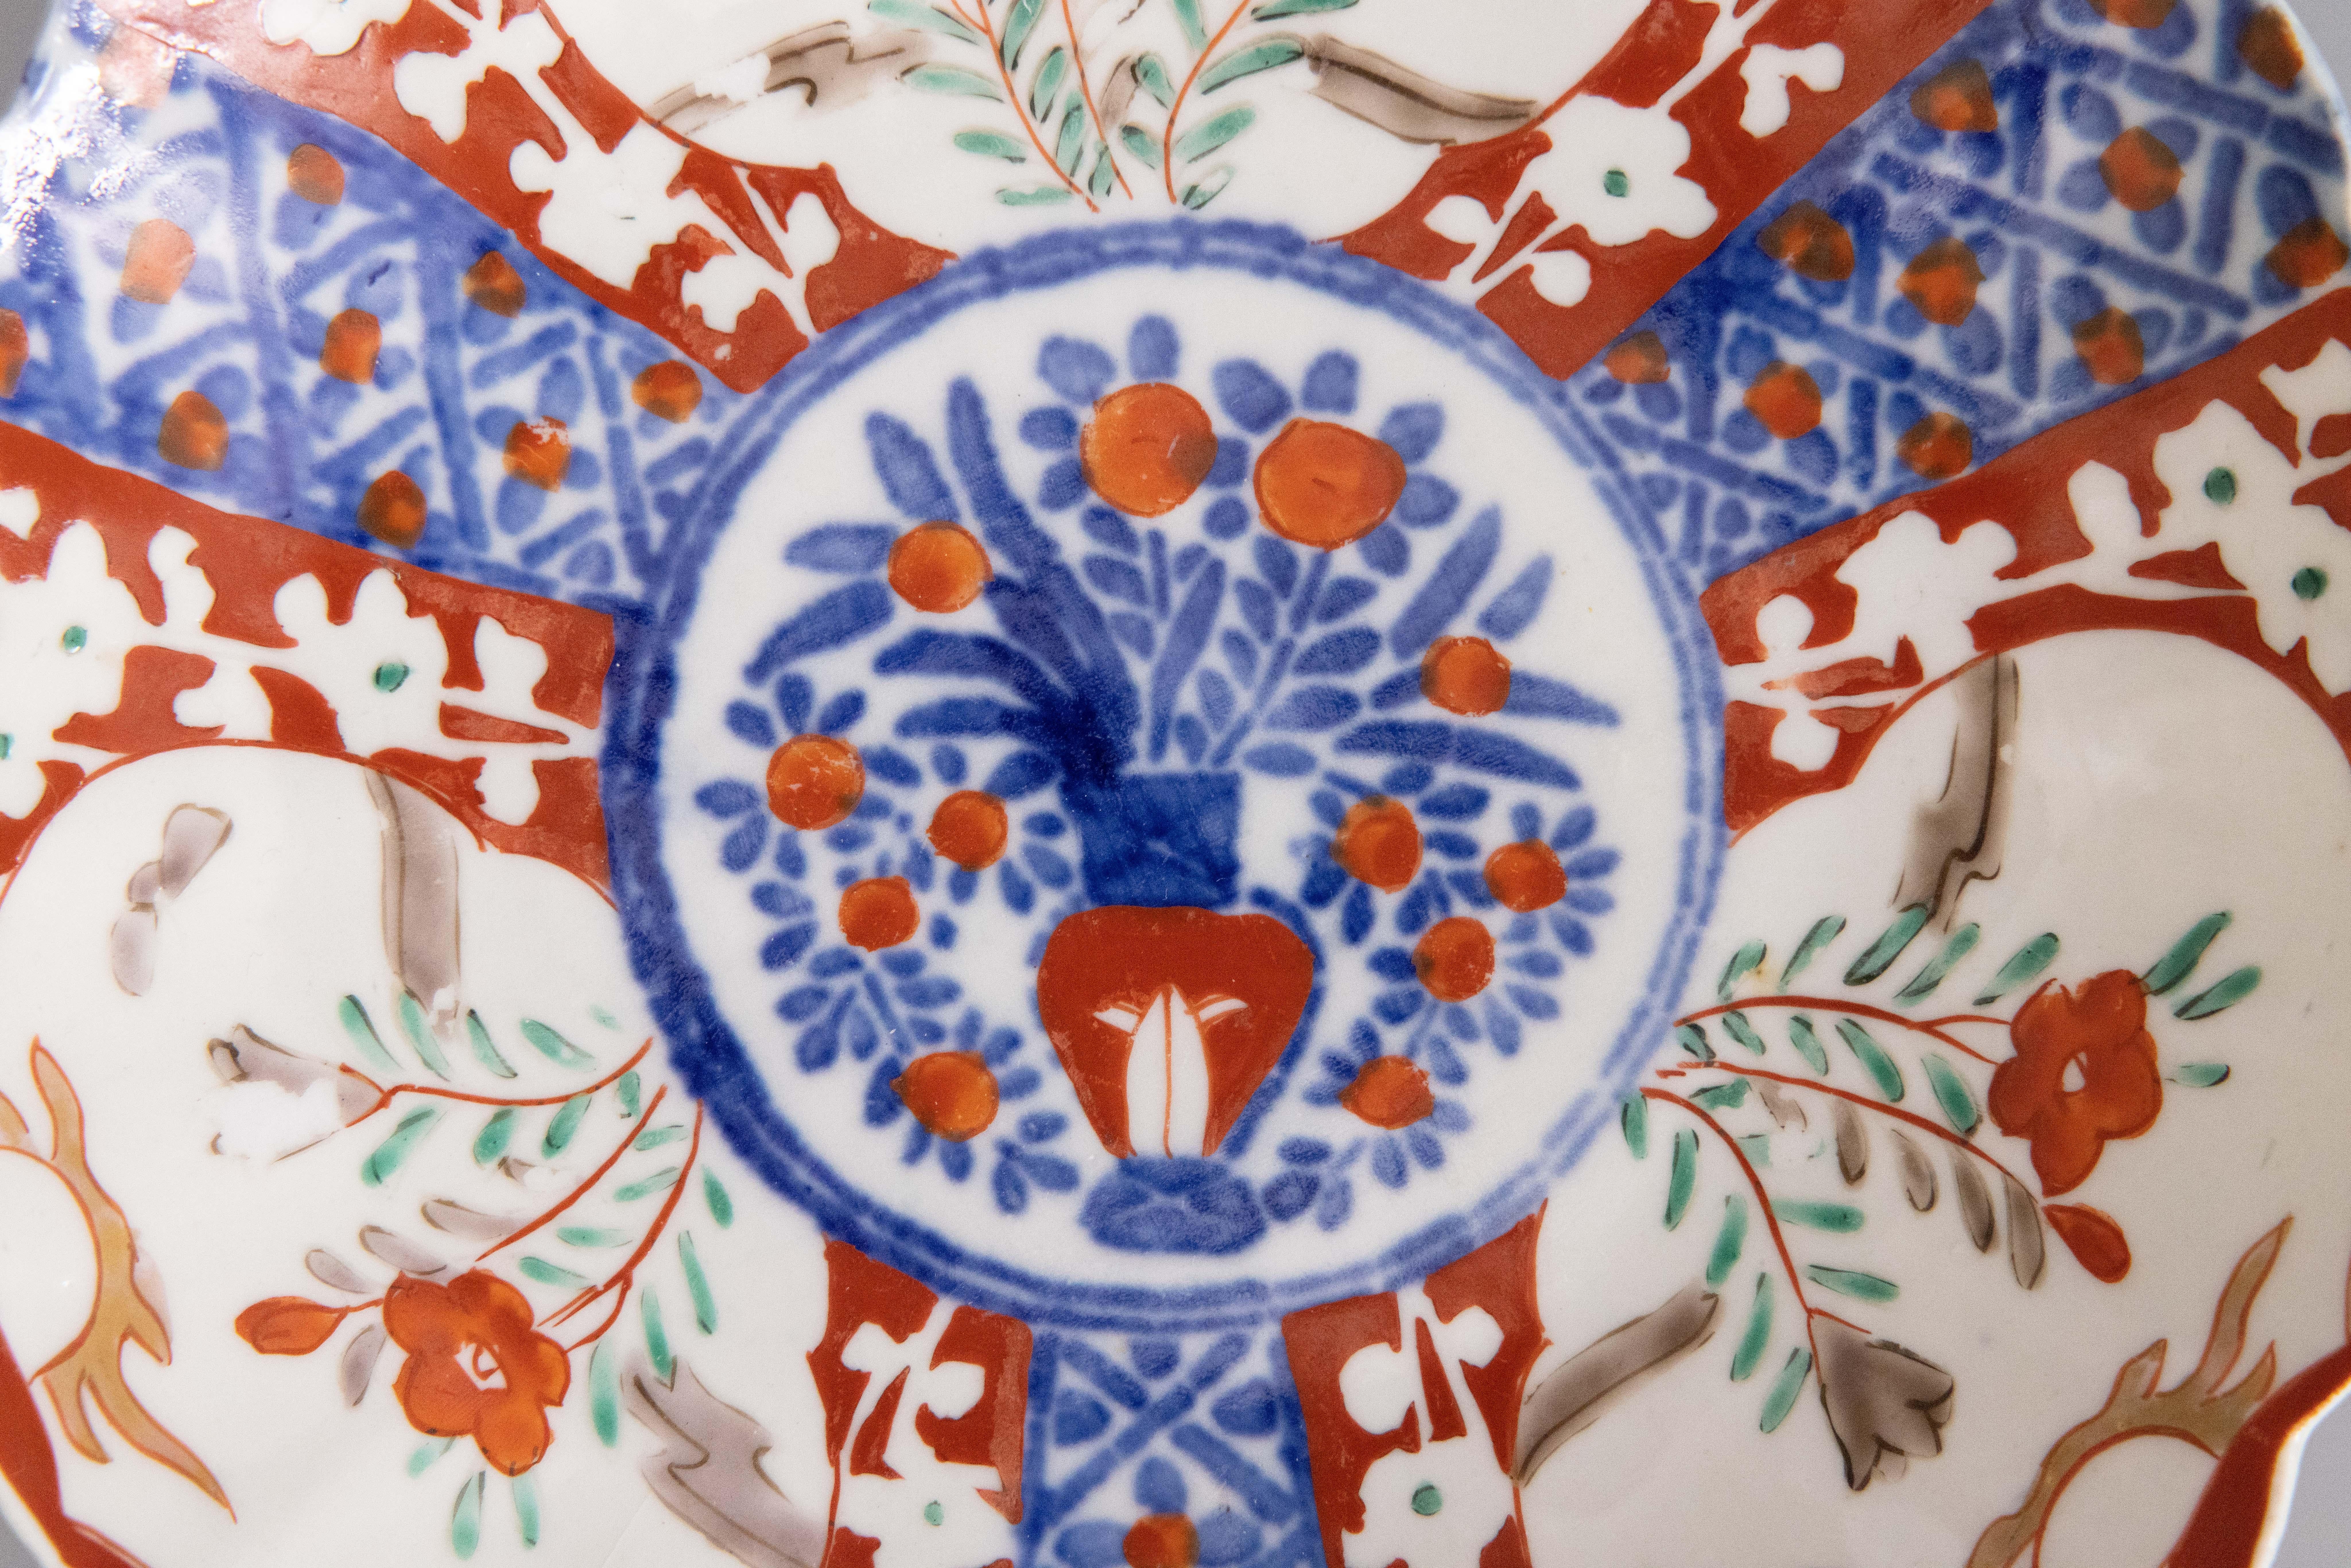 A gorgeous 19th-Century Japanese Imari porcelain plate with a hand painted floral design in the traditional Imari colors. This fine plate has lovely scalloped edges and displays beautifully.